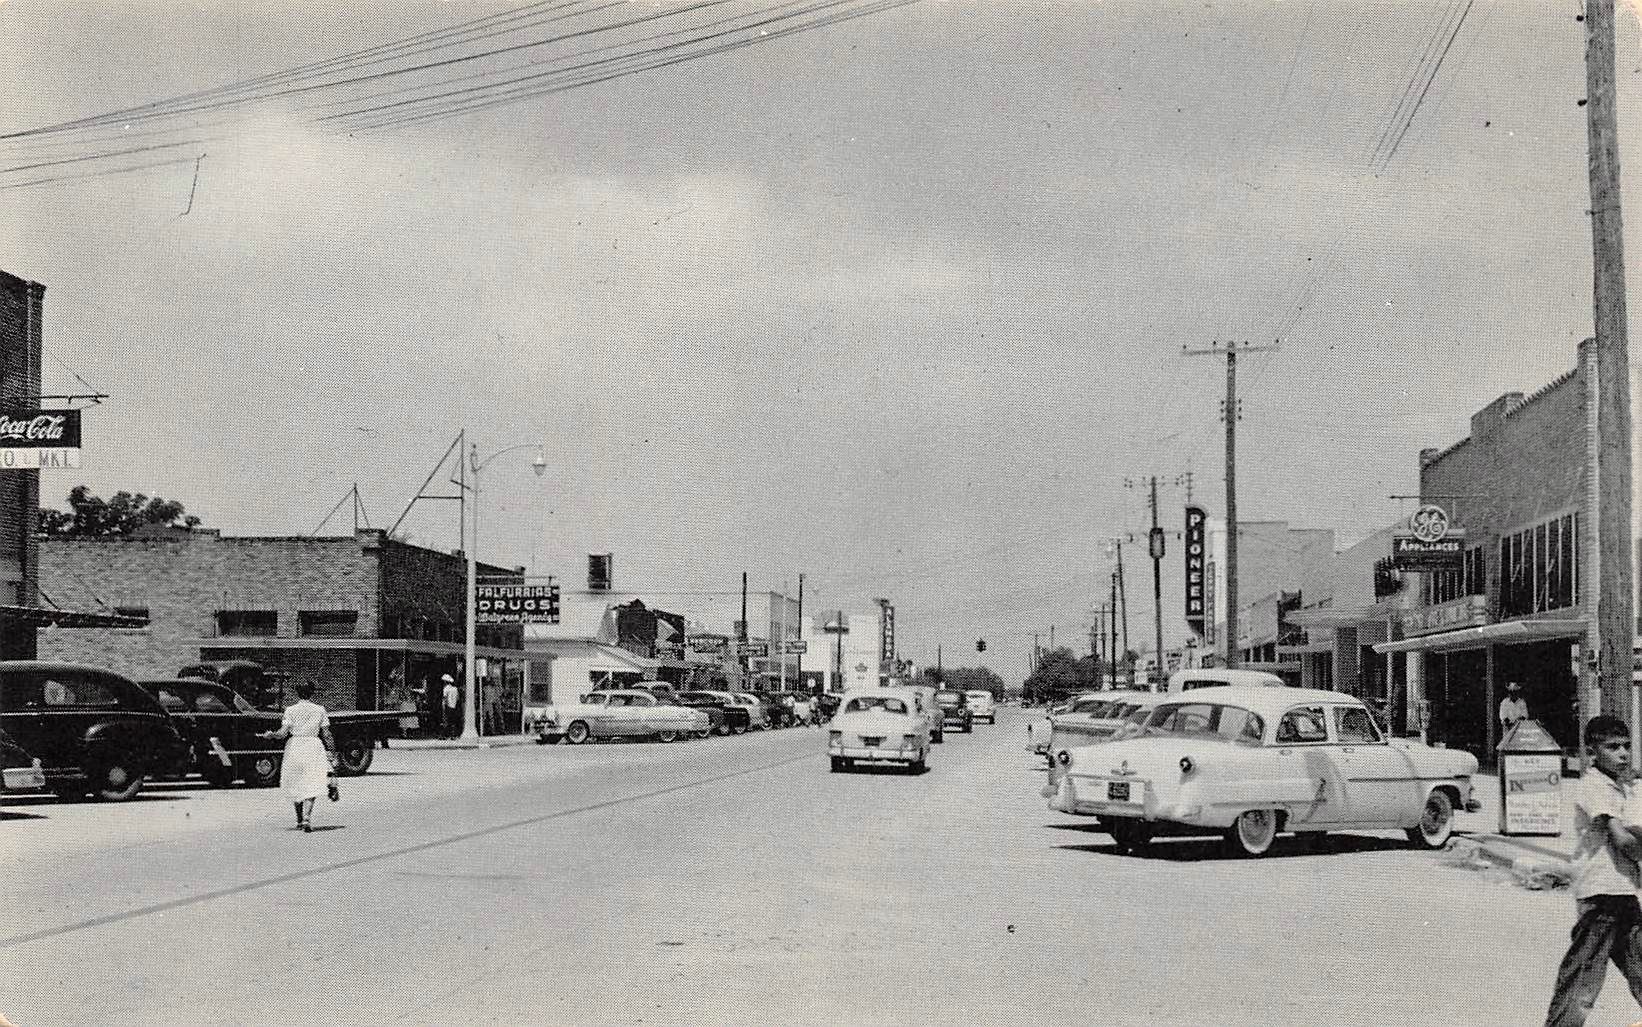 Falfurrias downtown during the 1950s